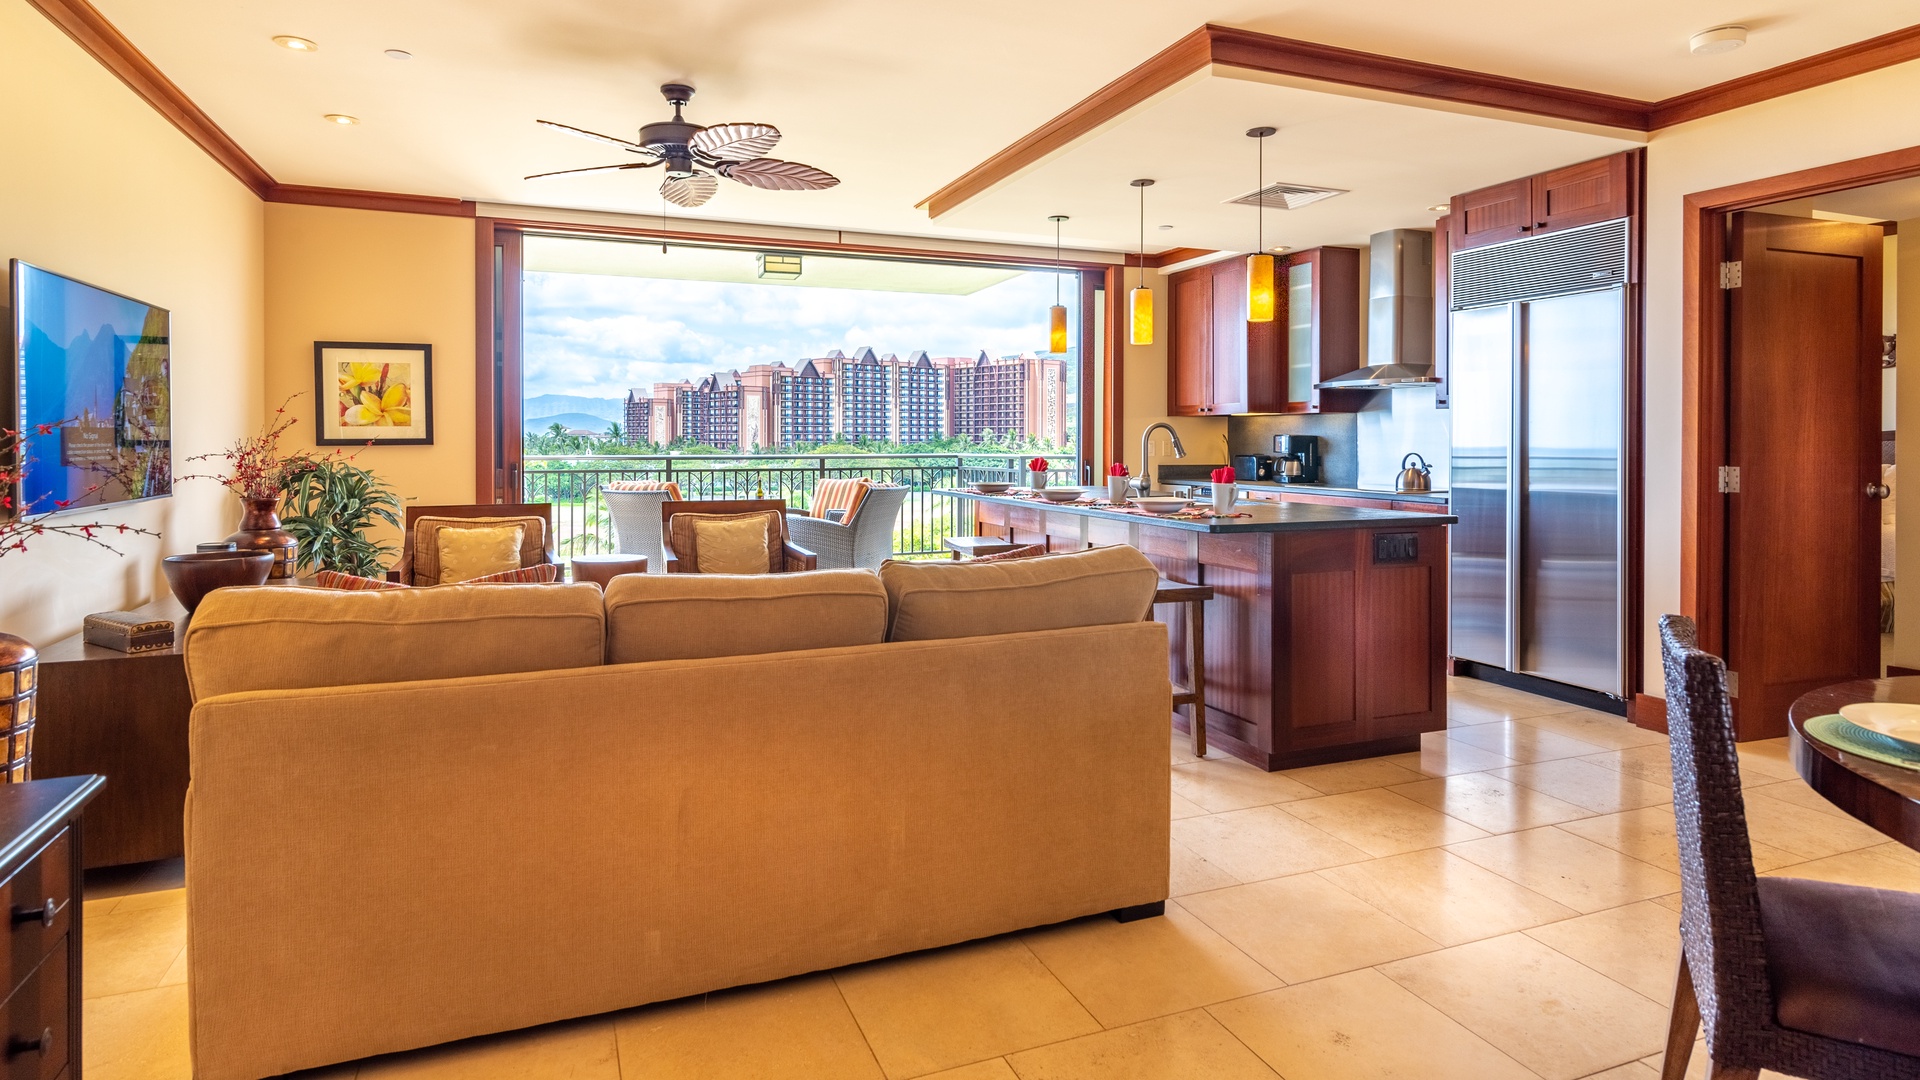 Kapolei Vacation Rentals, Ko Olina Beach Villas B608 - Relax on the couch and breathe in island breezes.